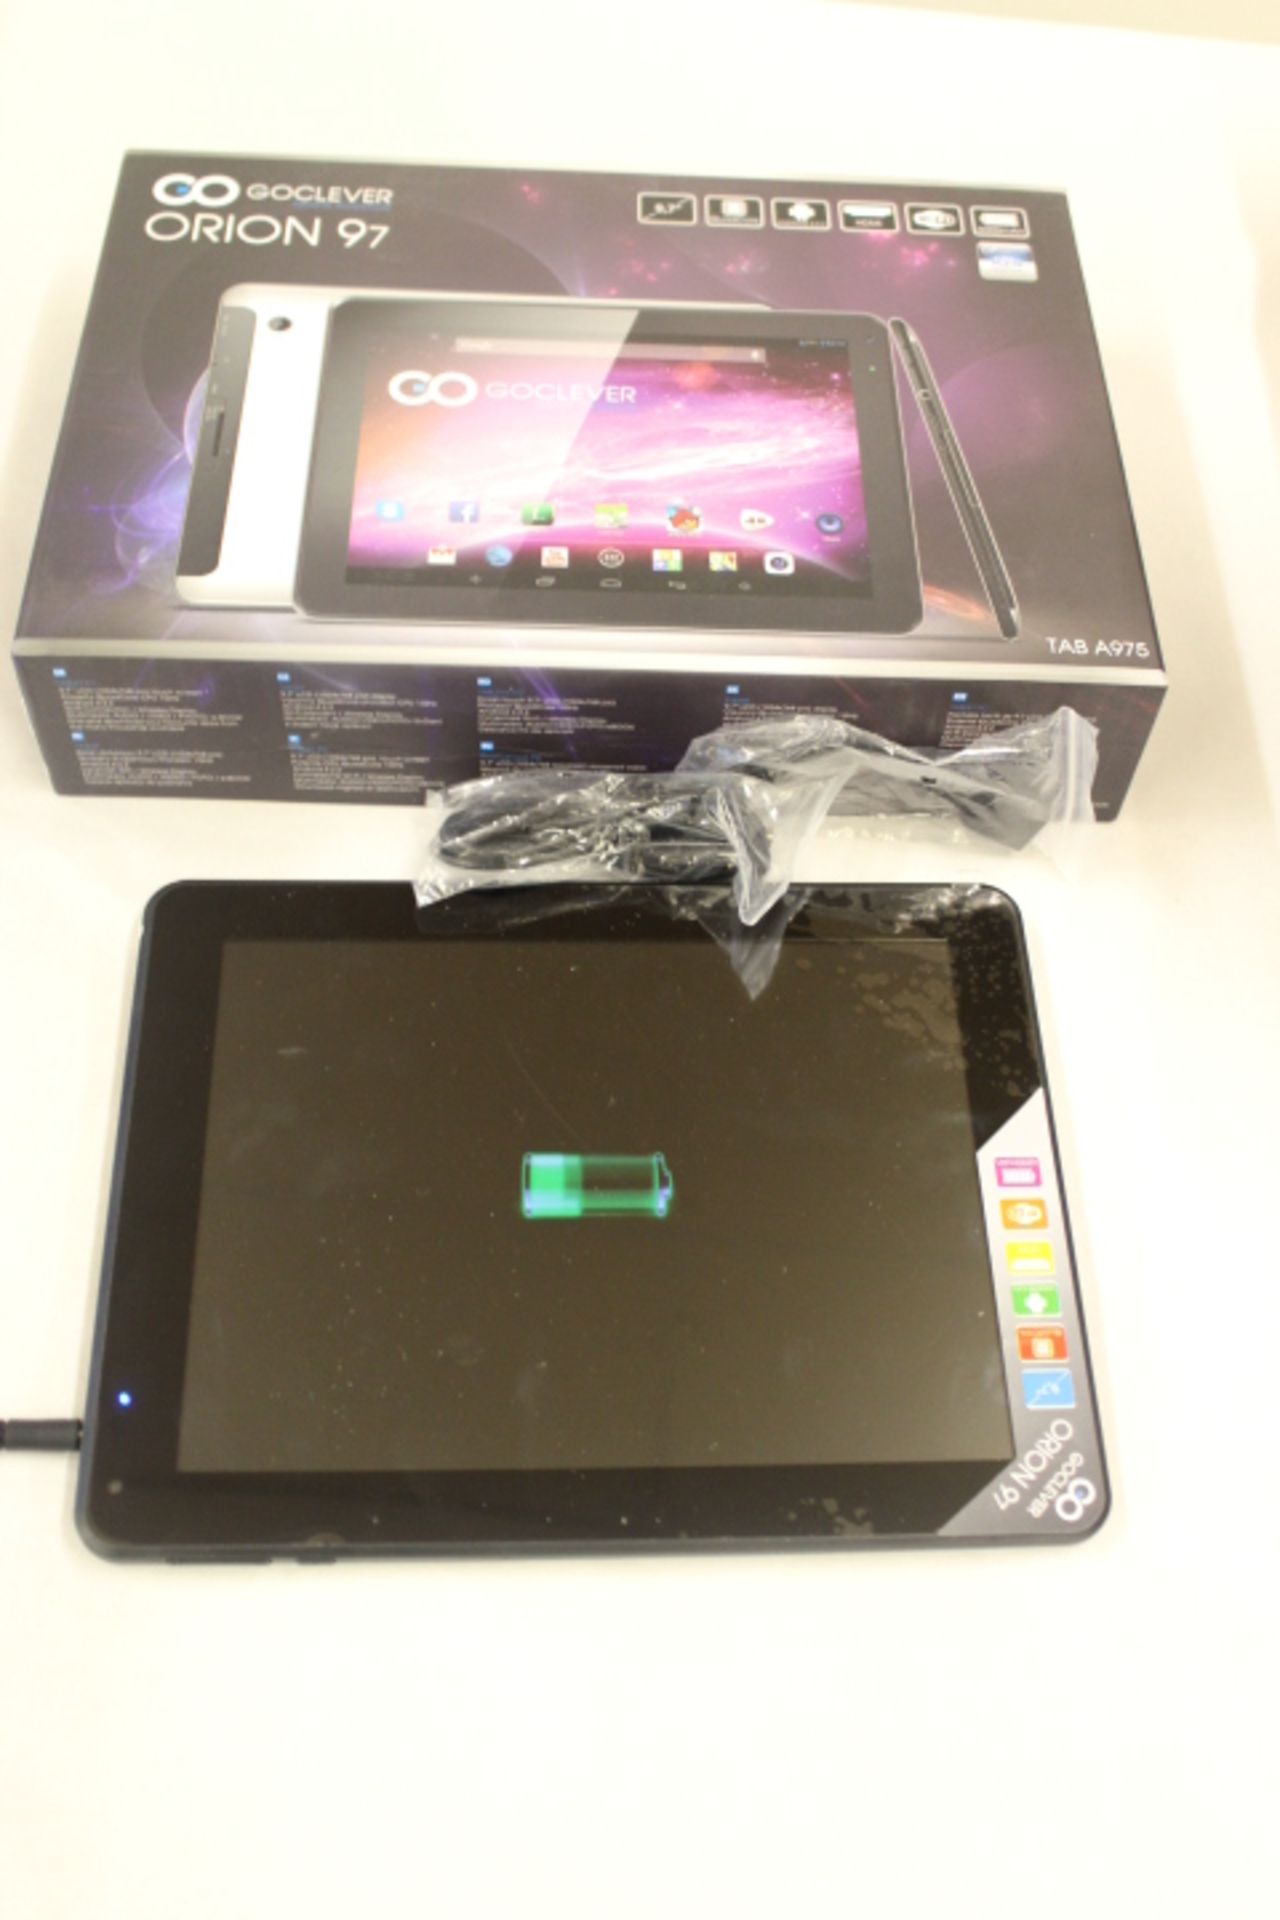 V GOCLEVER 9.7  4:3 Tablet Quad Core JB 4.2 1GB 8GB  2 Cam USB HDMI SD - RRP £119 - Item Is A 14 DAY - Image 2 of 2